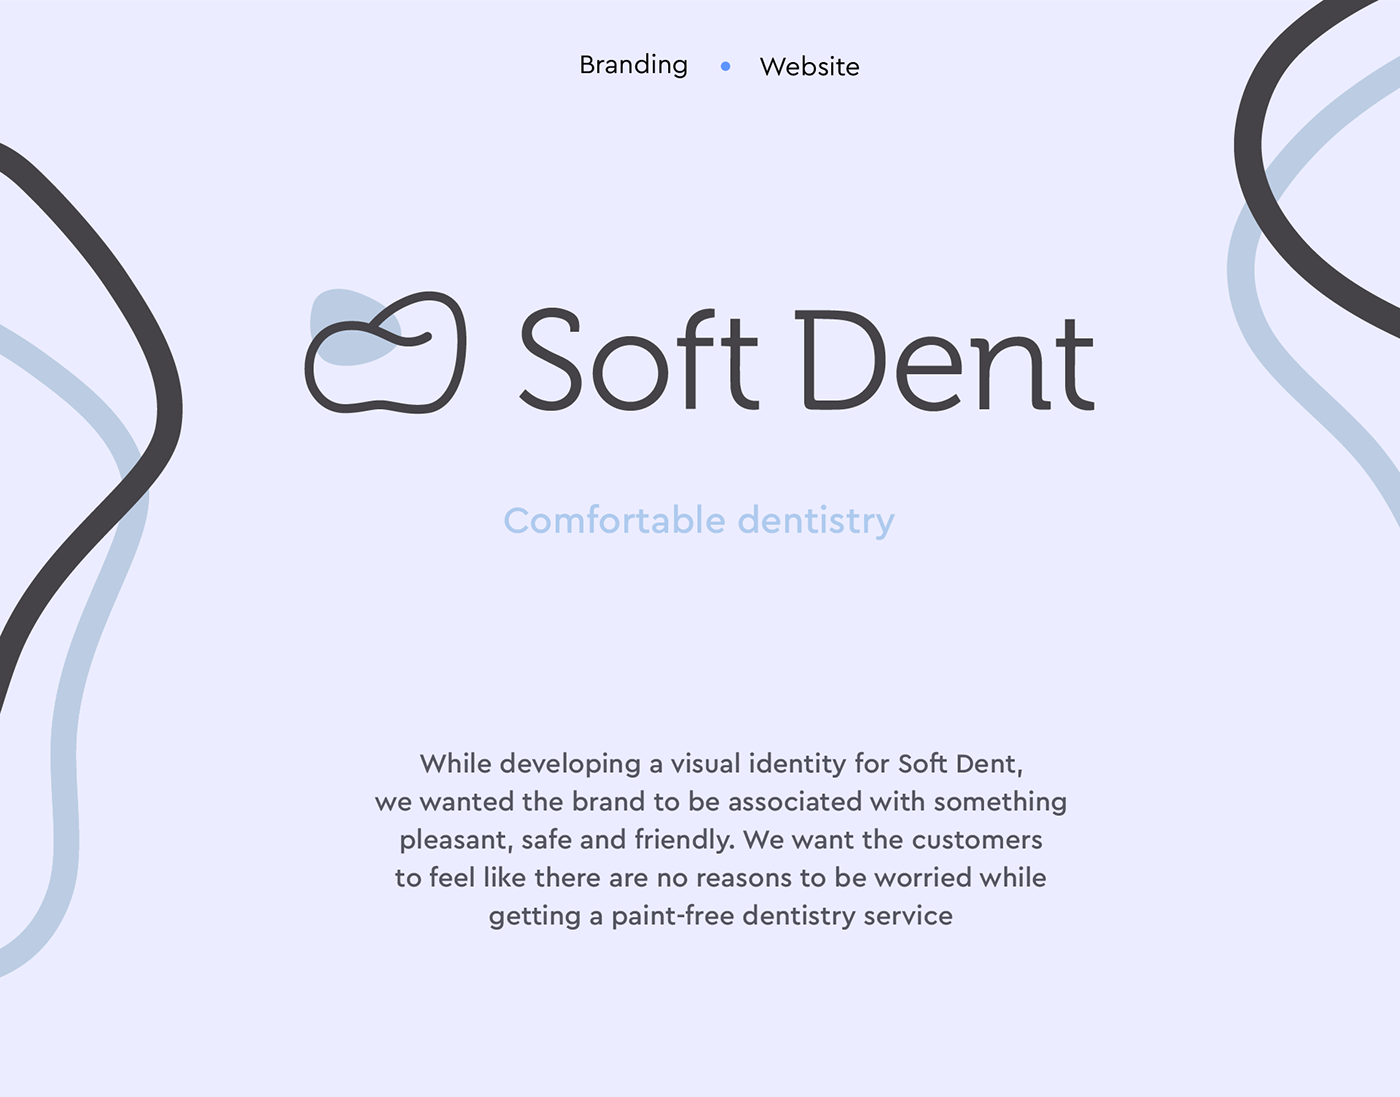 a visual identity for Soft Dent